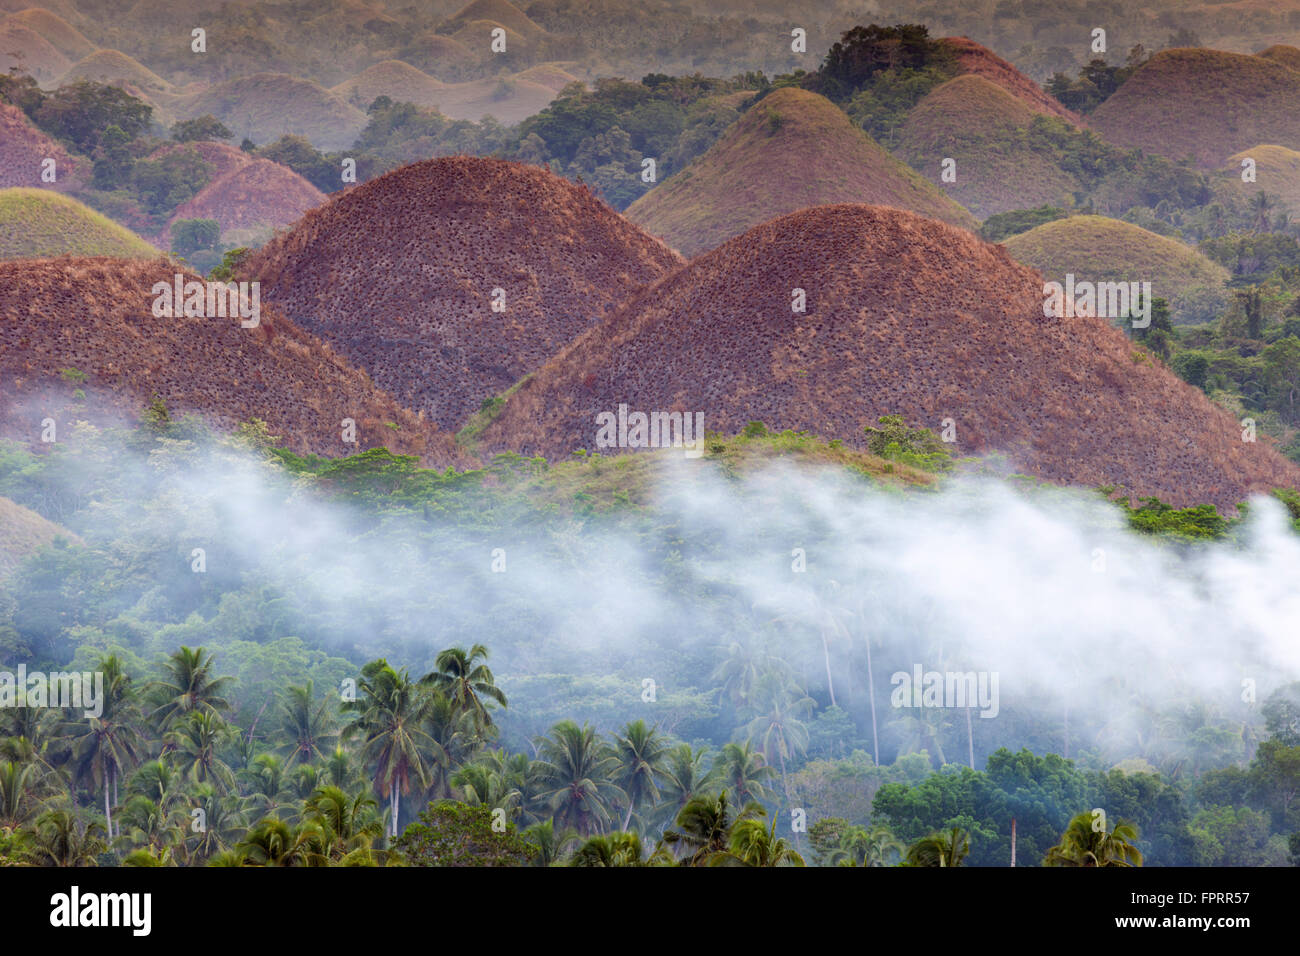 Philippines, Visayas, Bohol, the chocolate hills, karst domes turned a chocolate color during the burning season Stock Photo